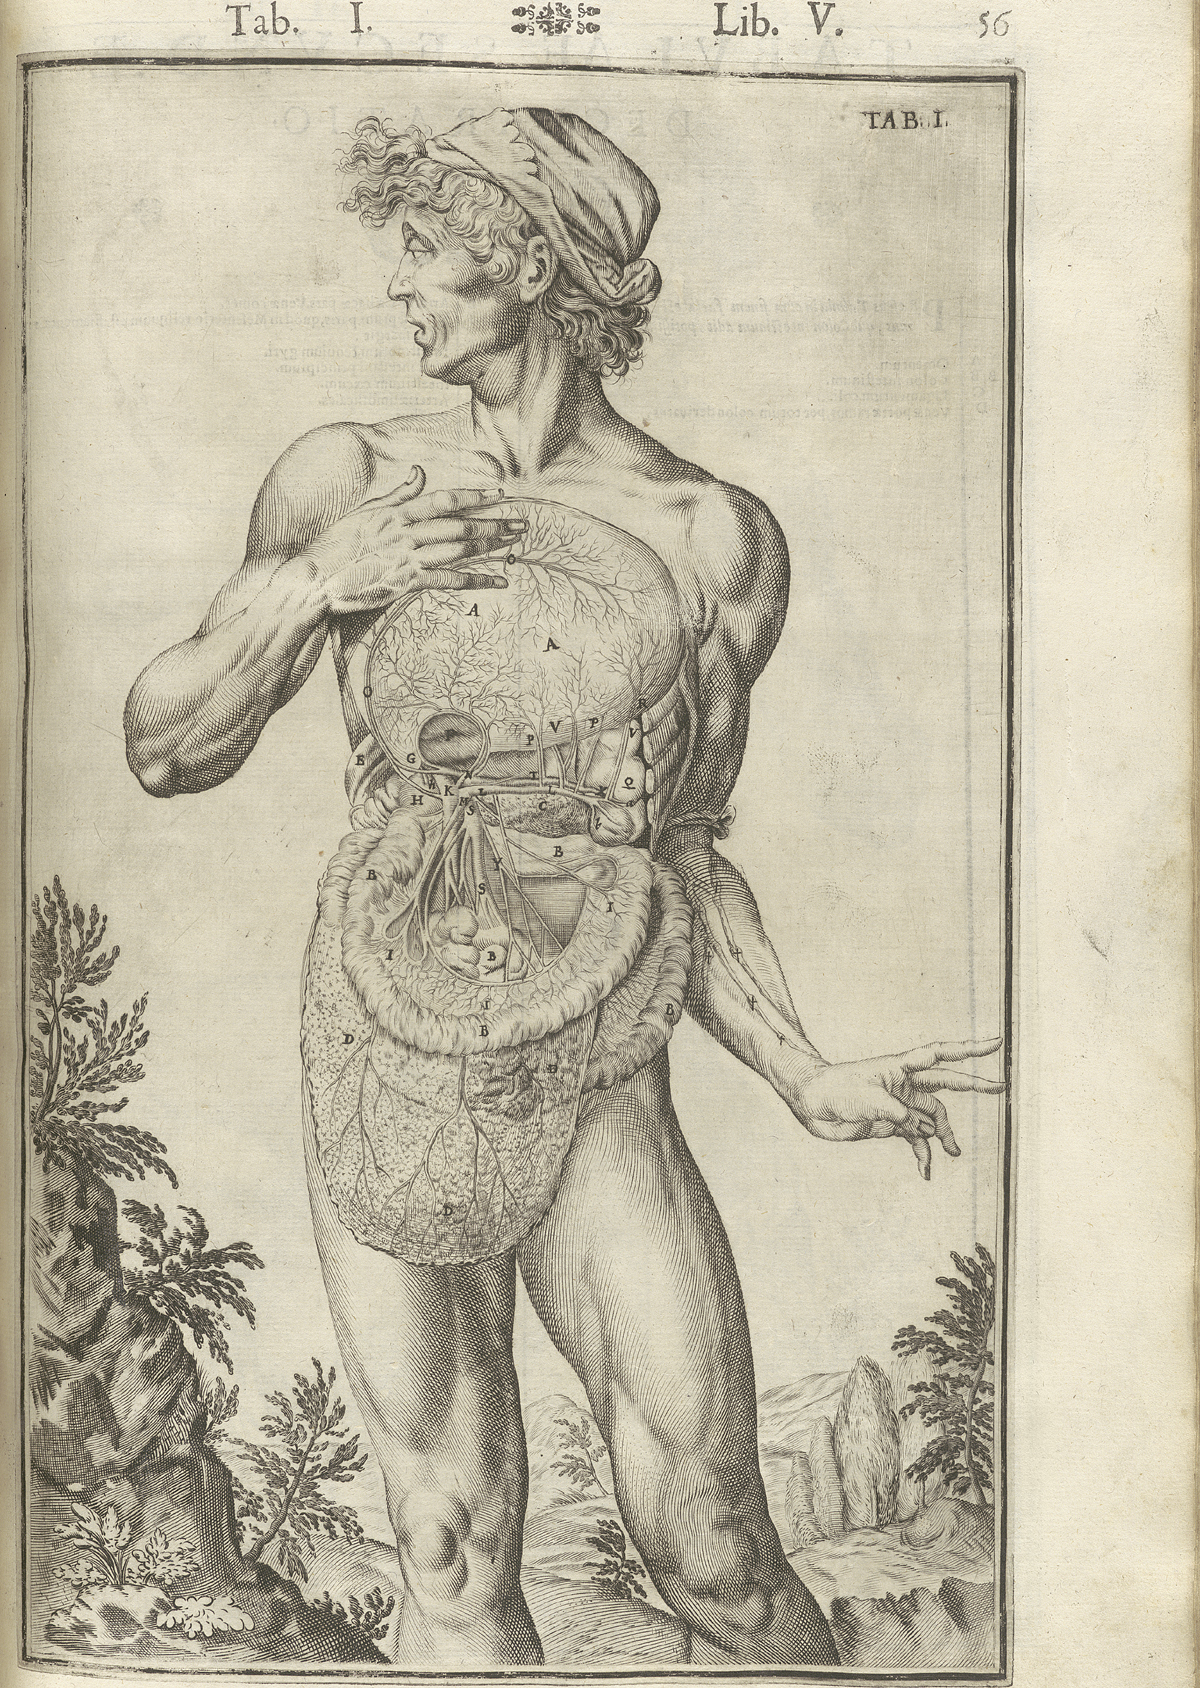 Engraving showing a frontal view of a standing nude male anatomical figure with face turned to the left in a pastoral setting, with his abdomen cut open showing the liver, peritoneum, intestines, stomach, and pancreas exposed in detail; from Adriaan van de Spiegel and Giulio Cassieri’s De humani corporis fabrica libri decem, Venice, 1627, NLM call no. WZ 250 S755dh 1627.